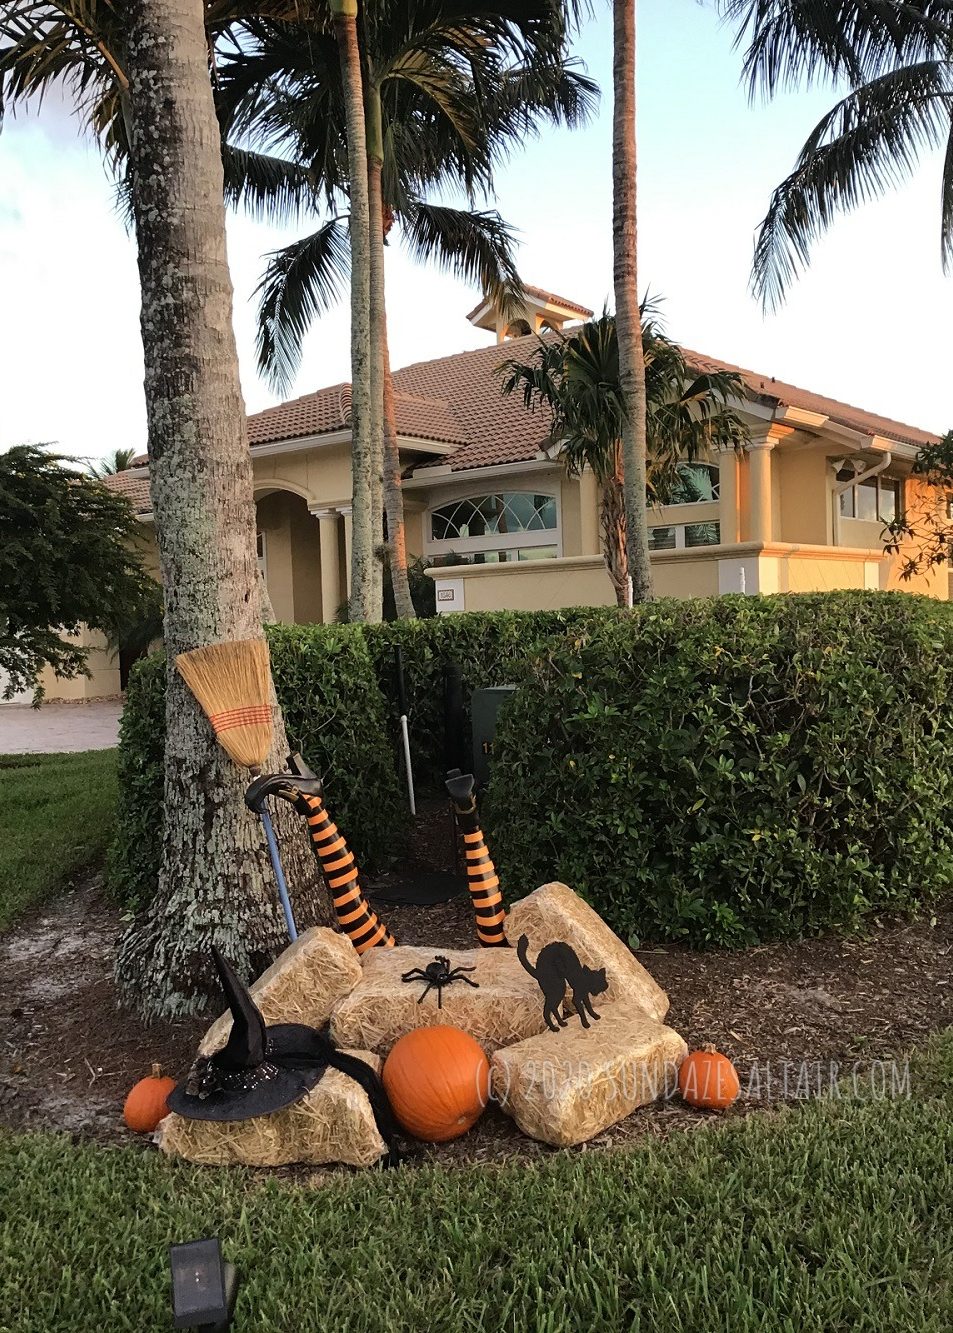 Witch Crash Landed Under Palm Trees In A Tropical Halloween Setting With Pumpkins, A Spider And A Black Cat